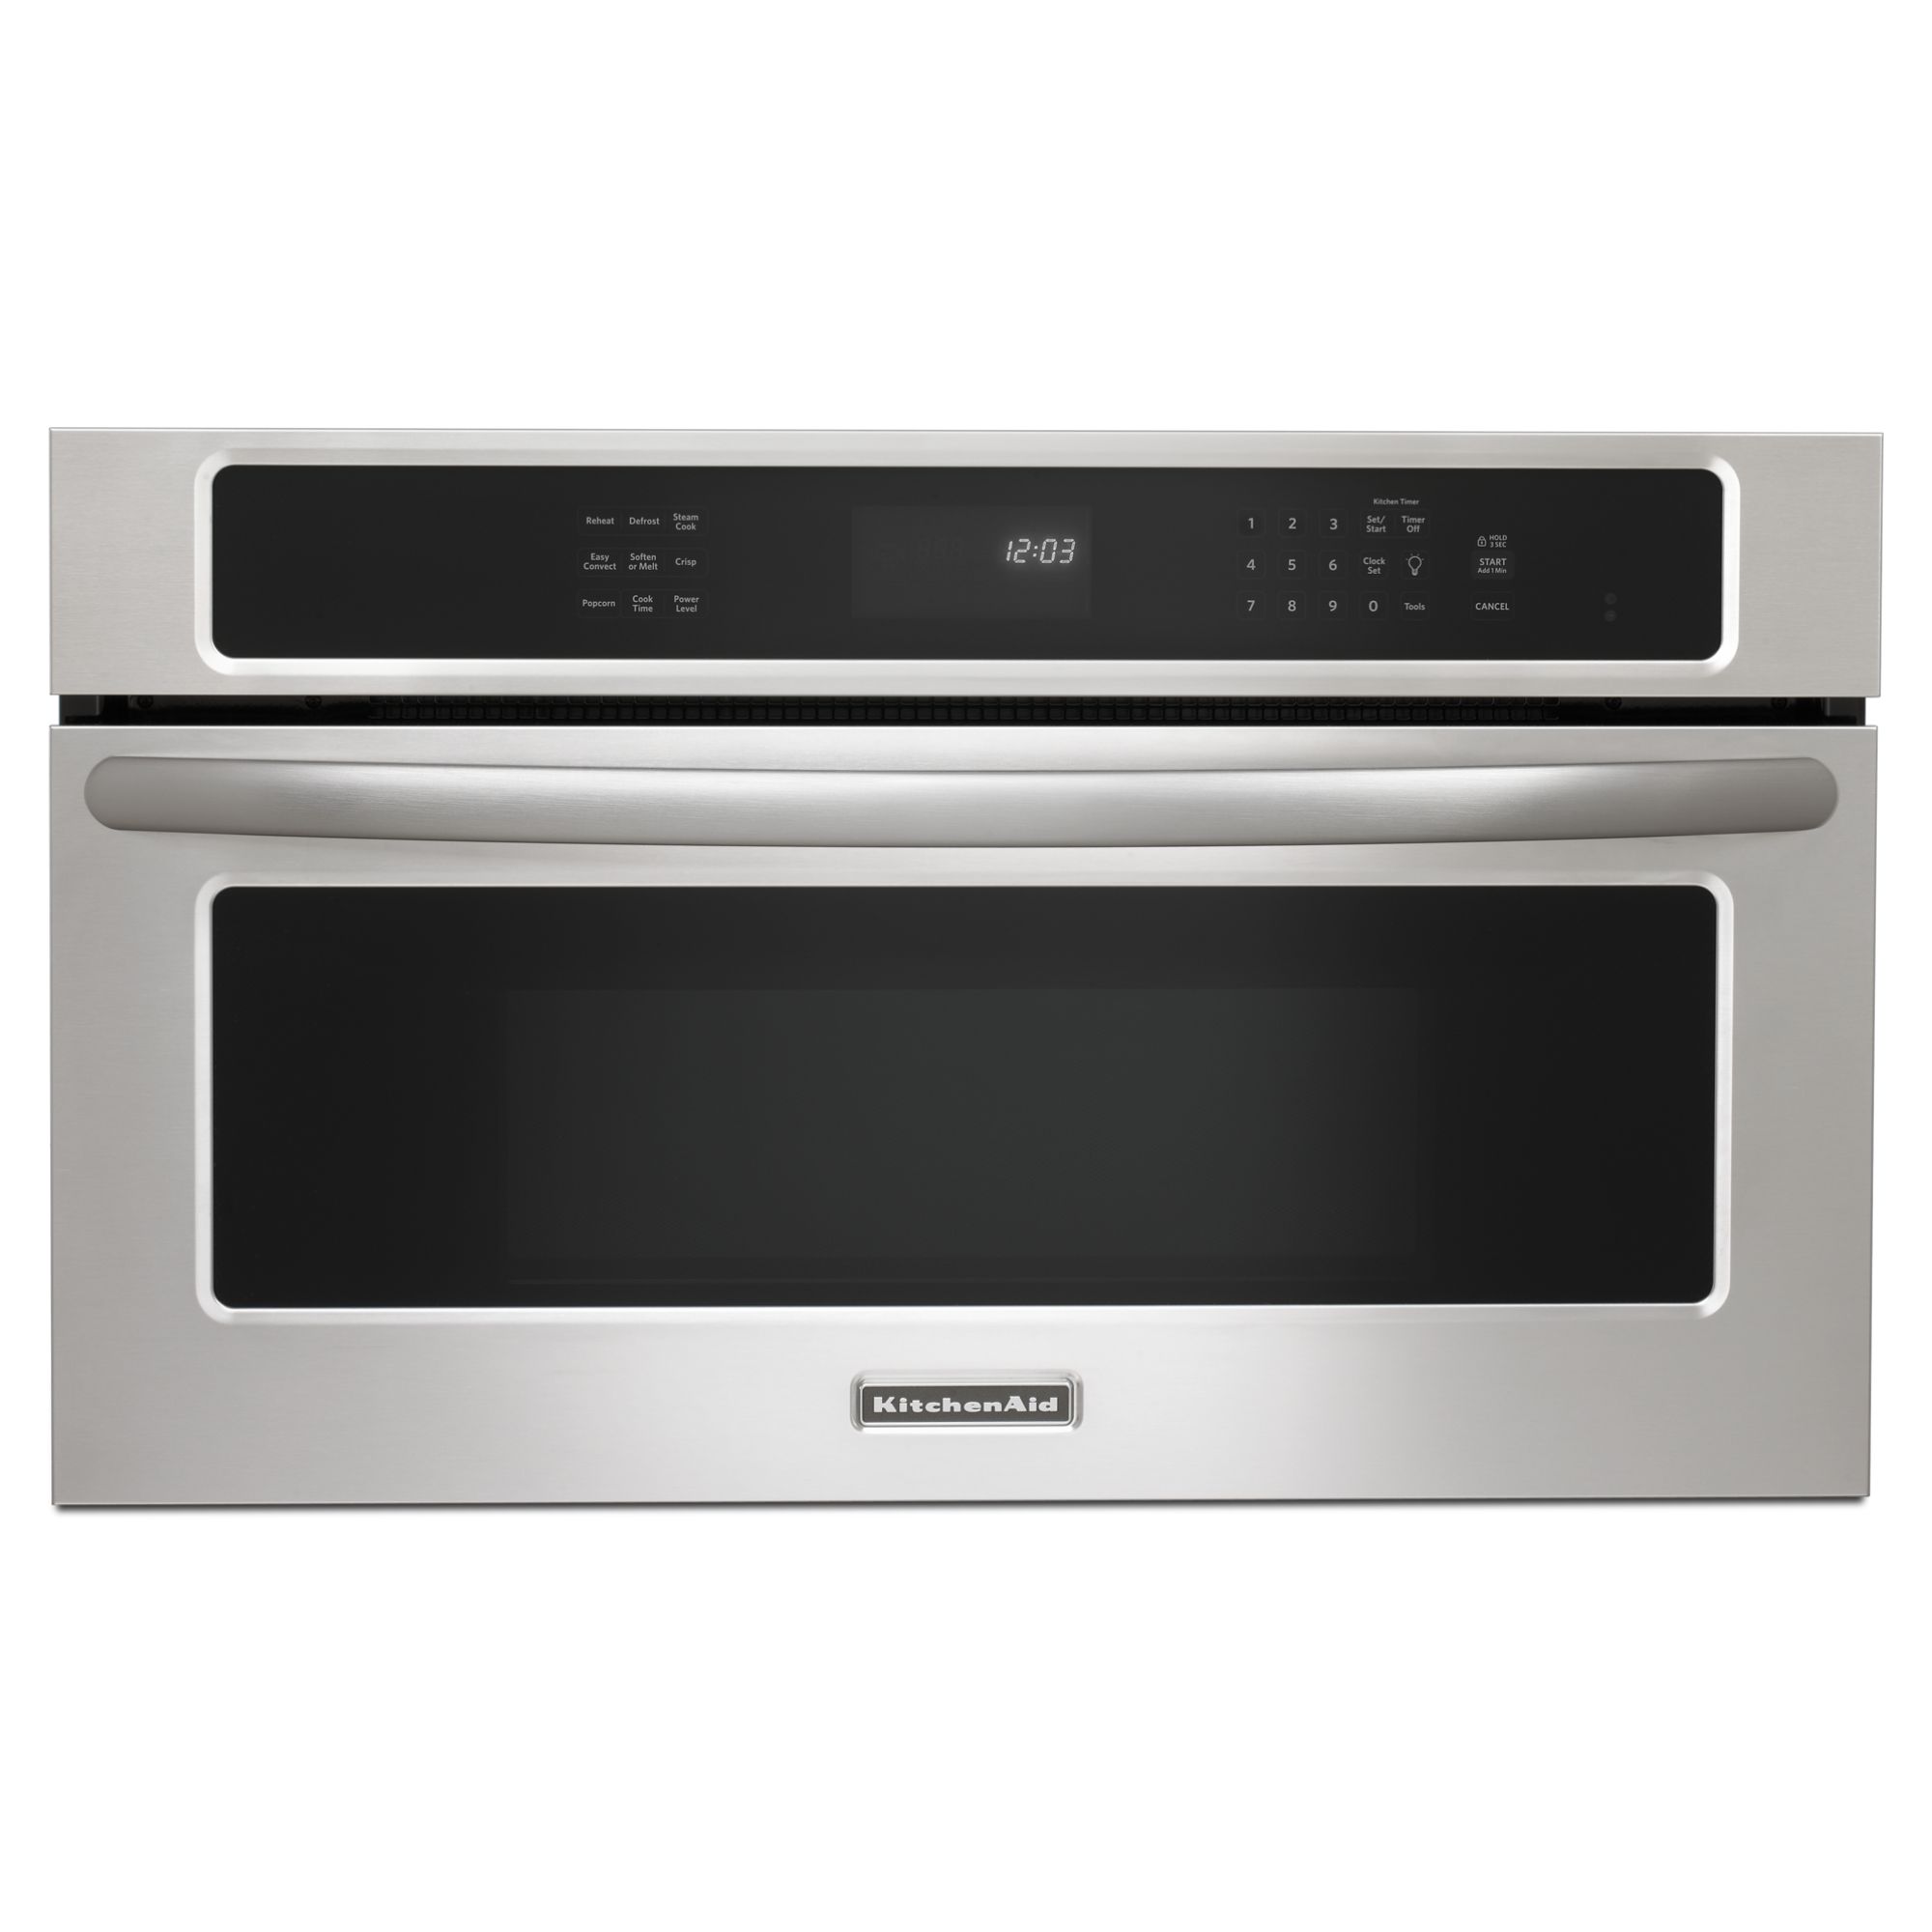 KitchenAid 1.4 cu. ft. 900-Watt 27 Built-in Microwave w/ Convection Cooking - Stainless Steel